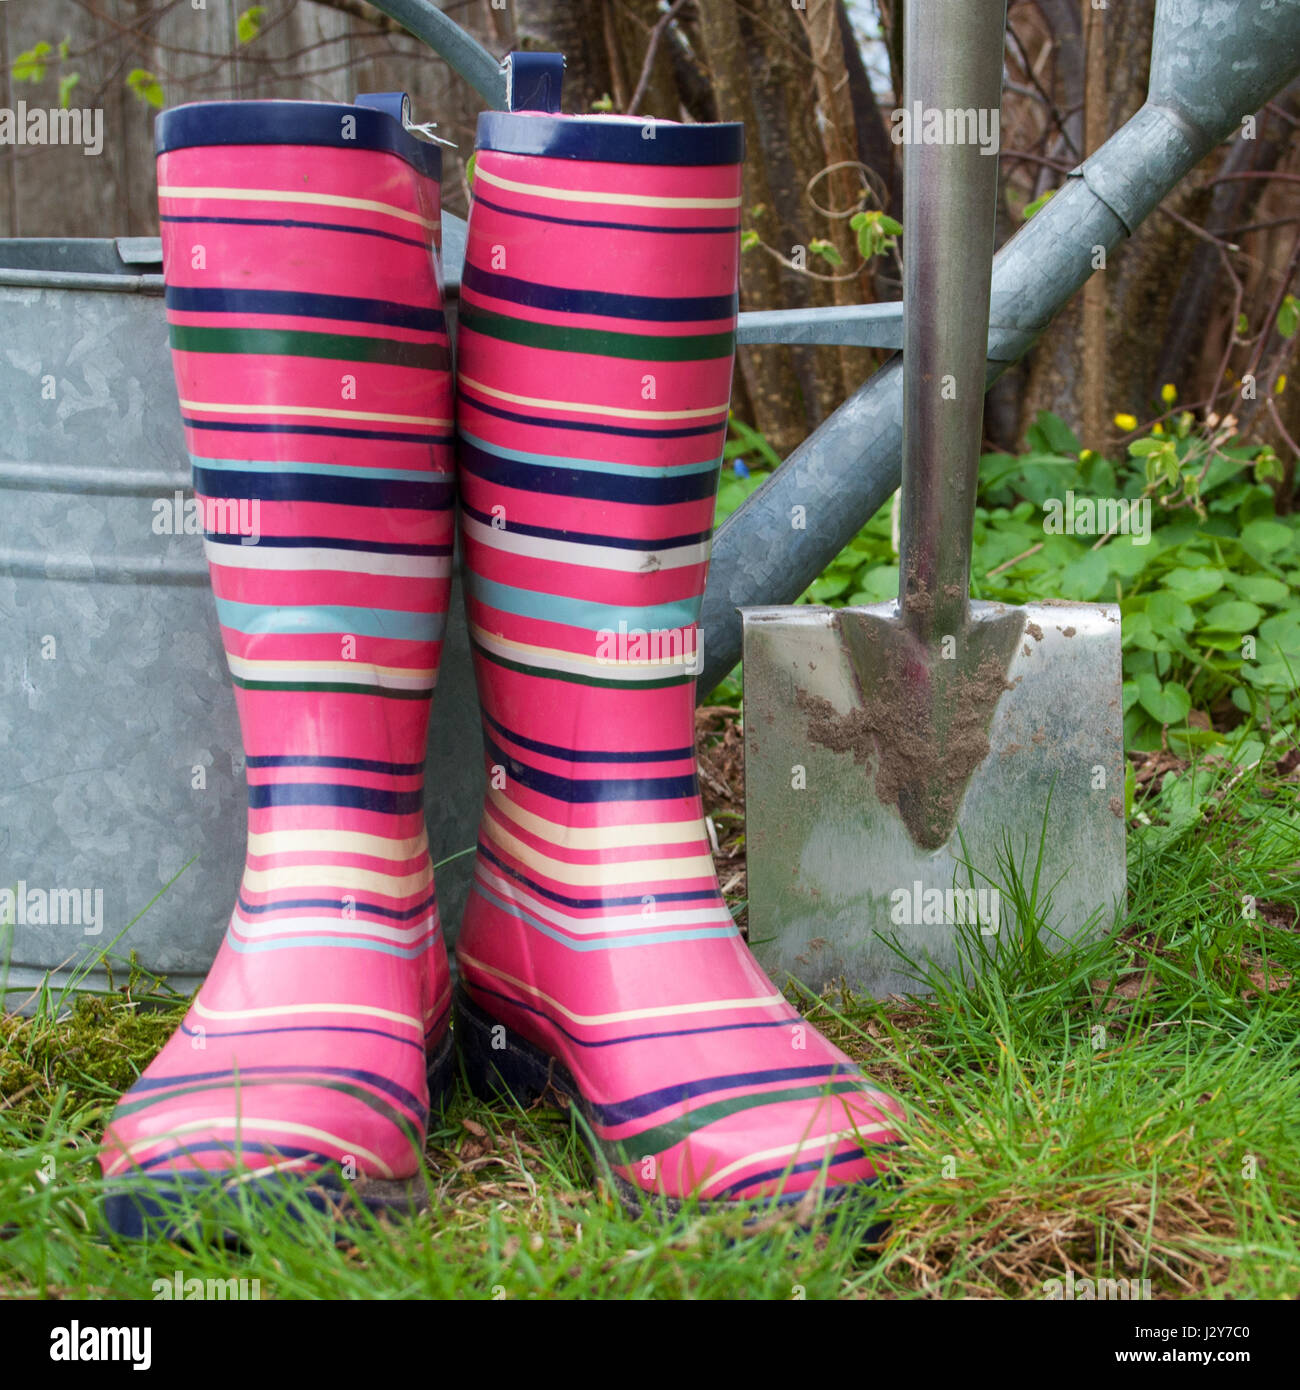 Rubber boots, spade and watering can in the garden Stock Photo